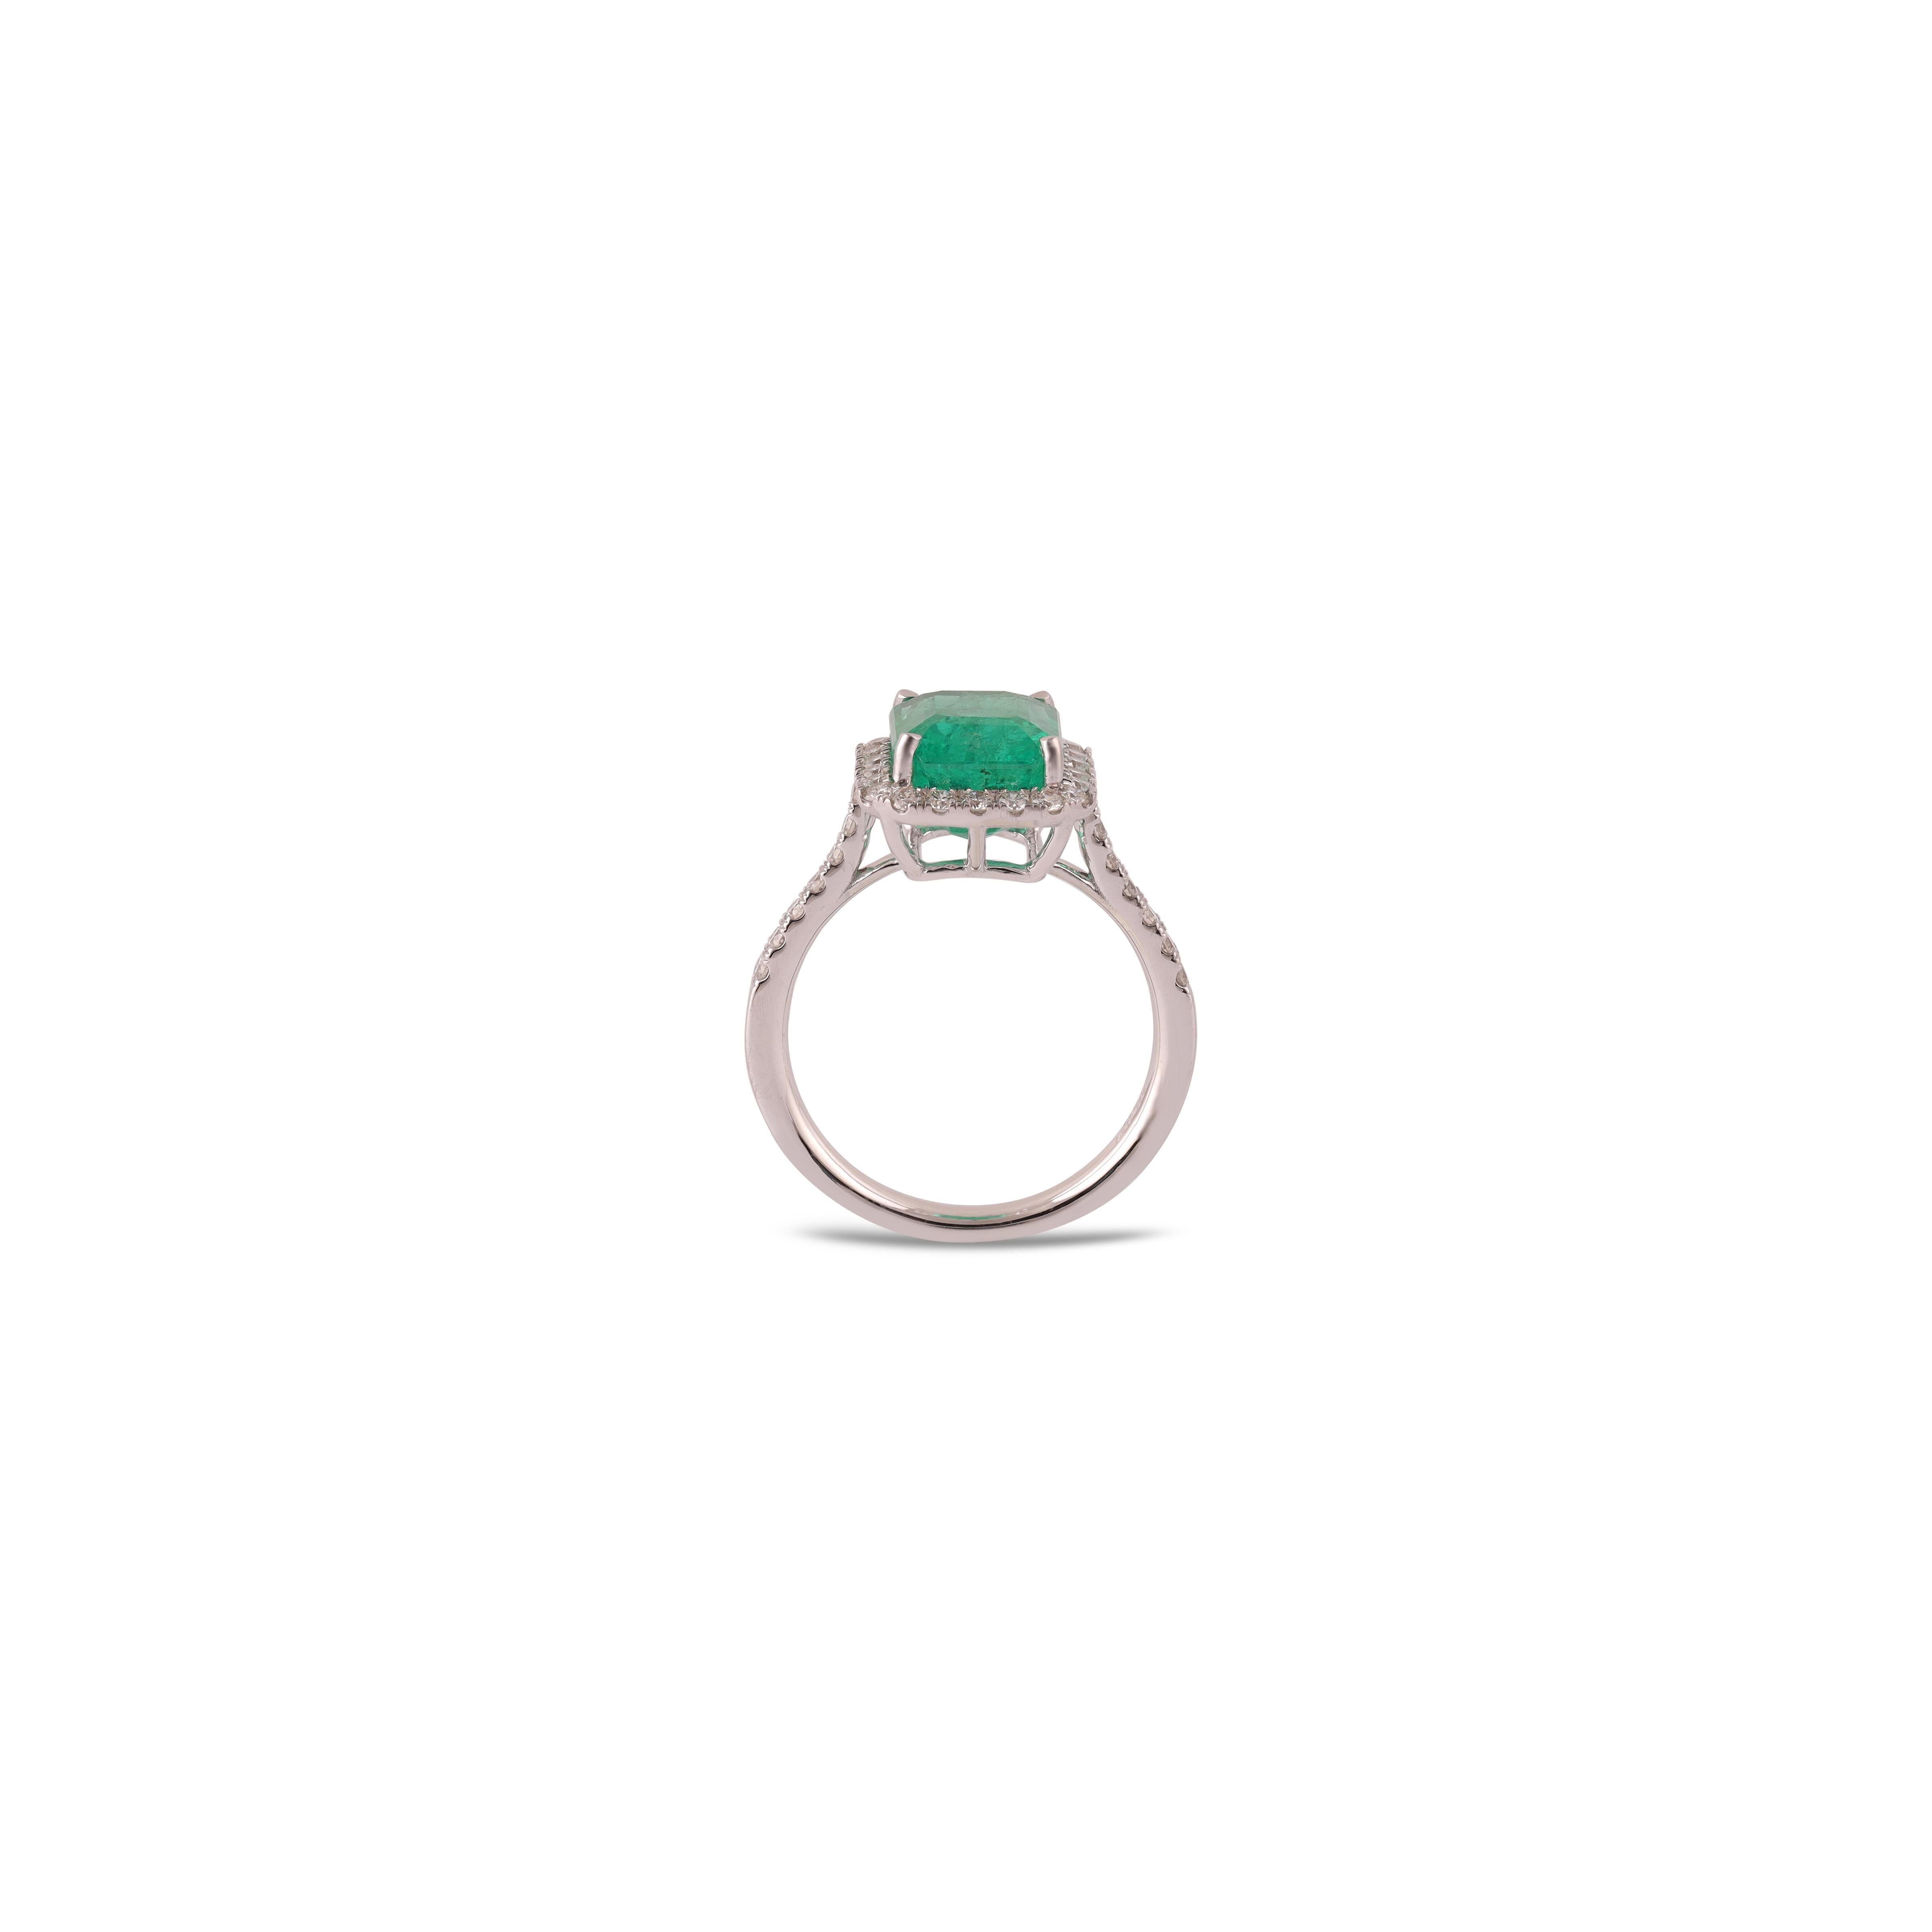 Contemporary 3.94 Carat Clear Zambian Emerald & Diamond Cluster Ring in 18Karat White Gold For Sale